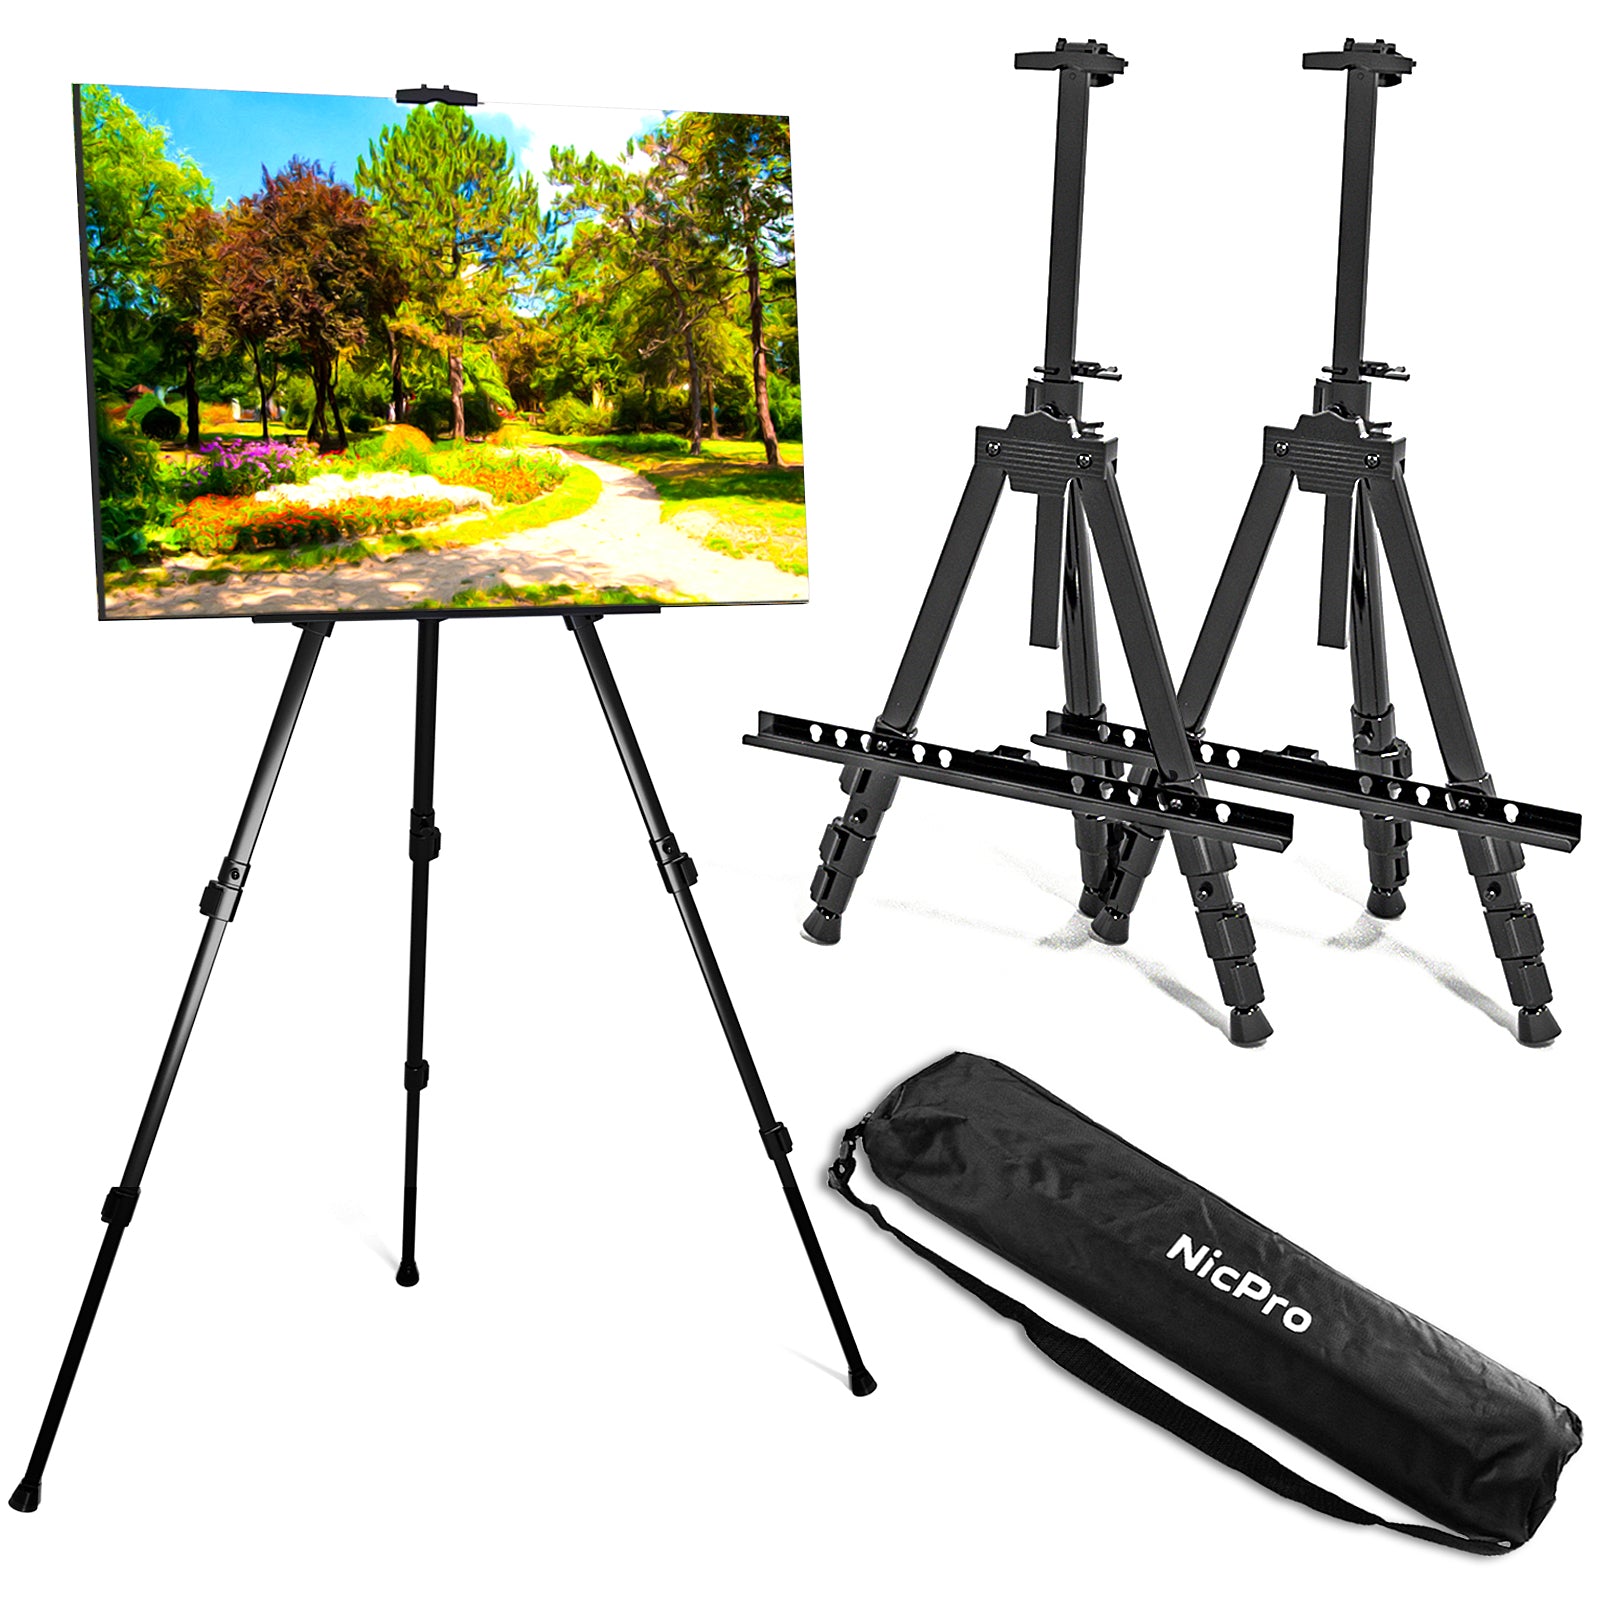 Portable Artist Easel Stand 63 Inches - Black Picture Stand Painting Easel  with Bag - Table Top Art Drawing Easels for Painting Canvas, Wedding Signs,  Poster, T…